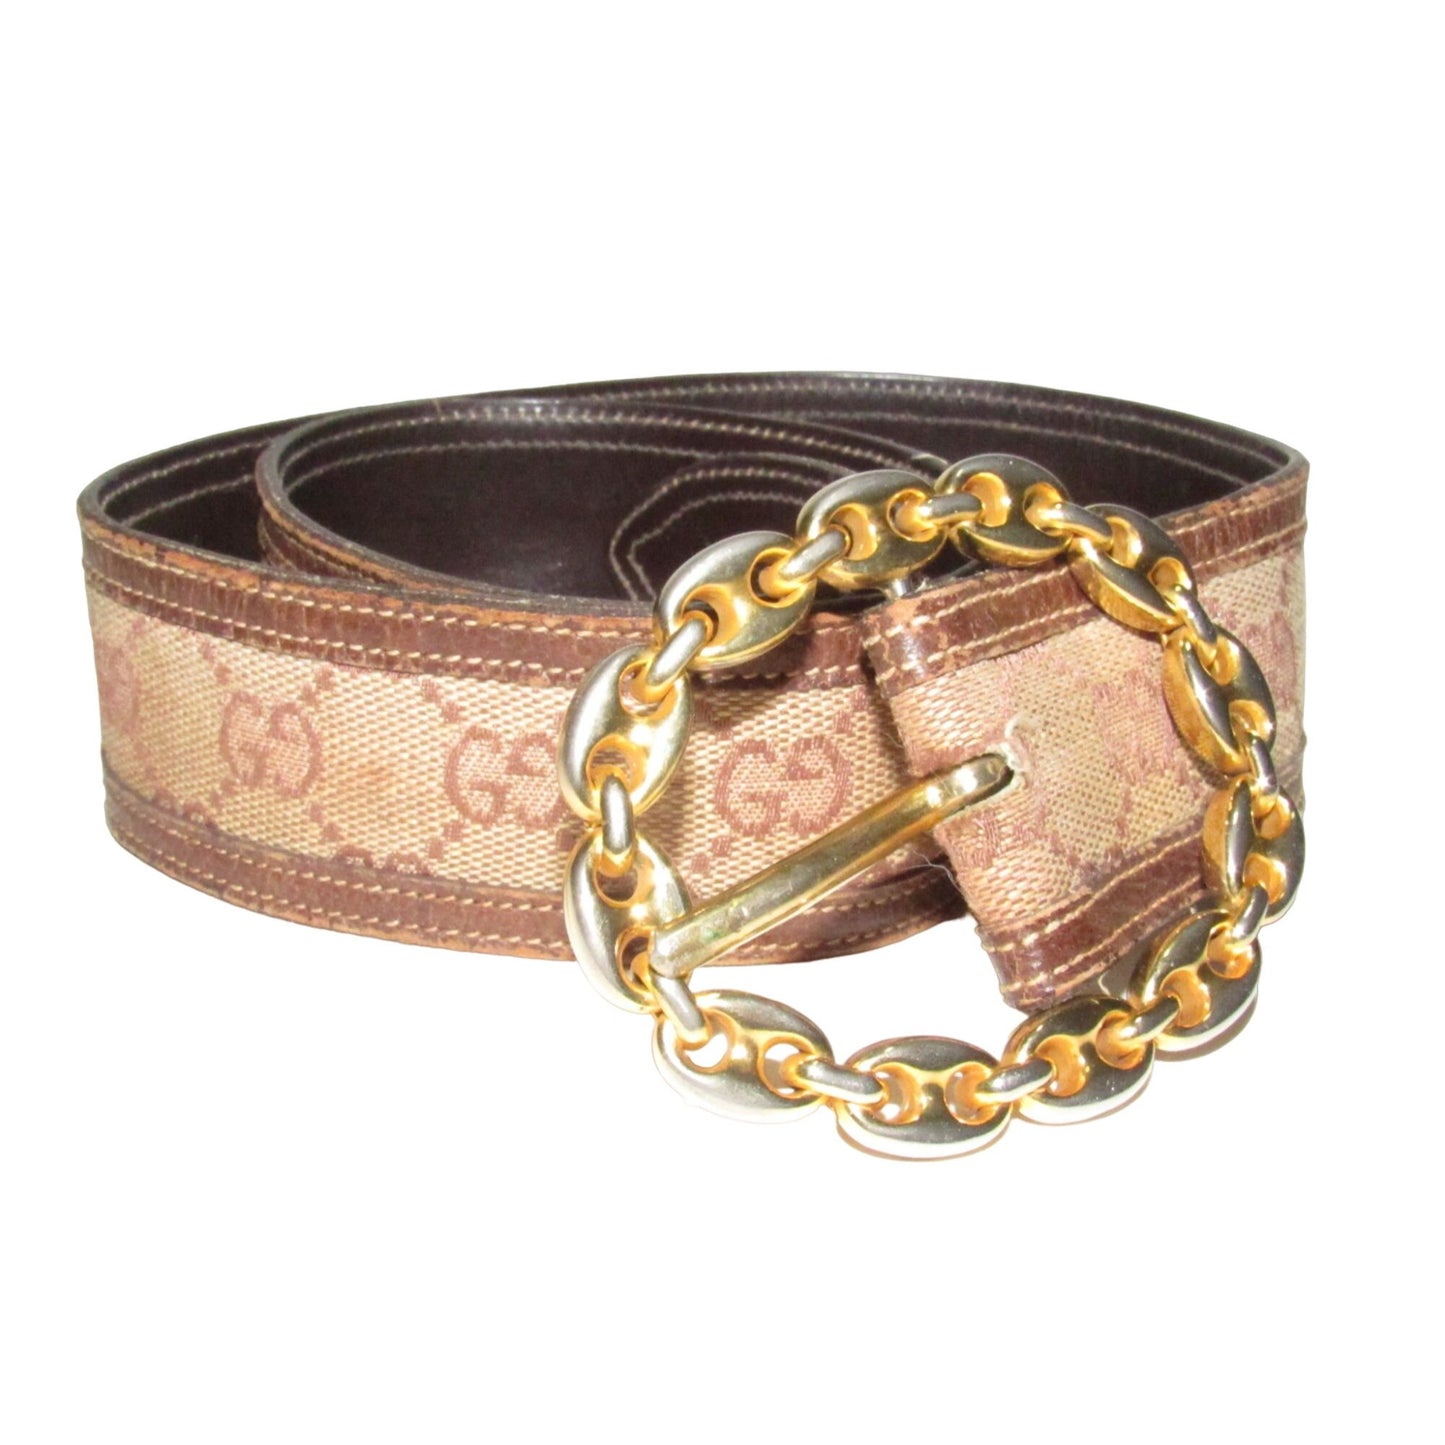 Early brown Guccissima leather belt w a gold Gucci link buckle